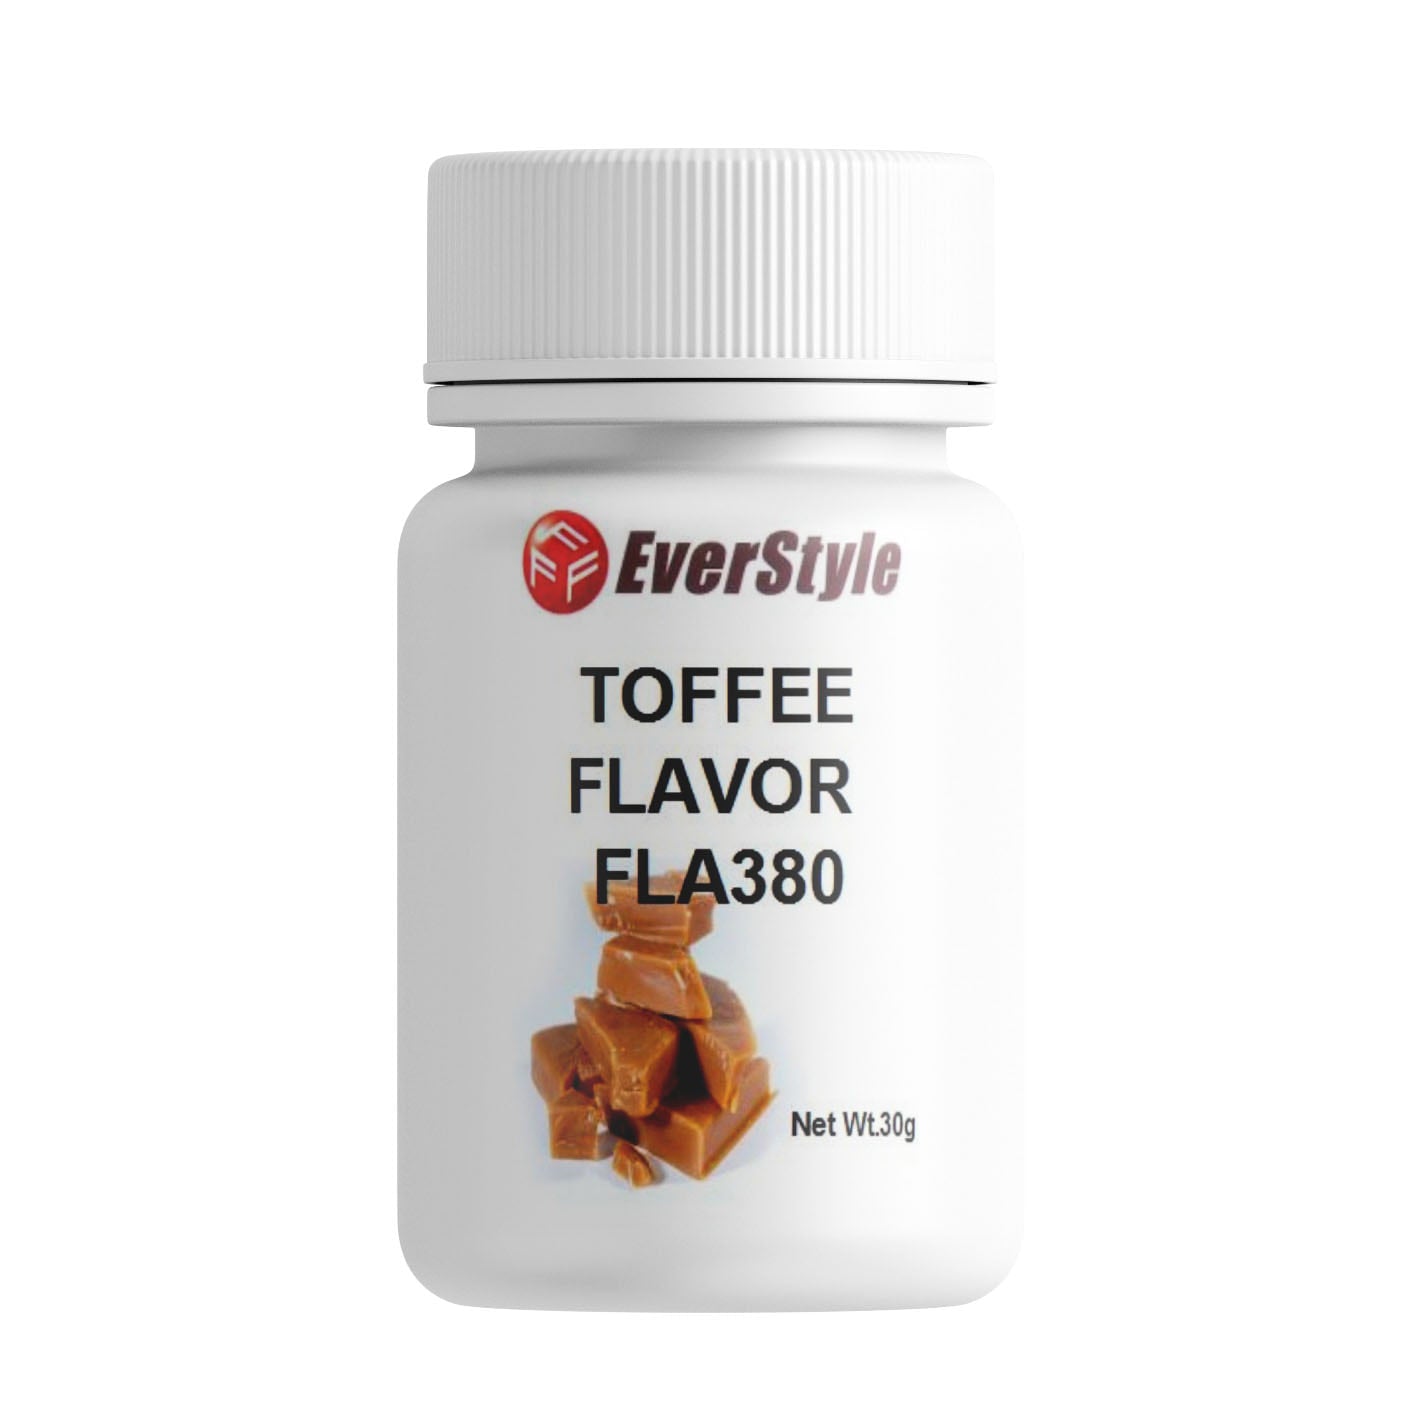 Everstyle Toffee Flavor 30g (FLA380)